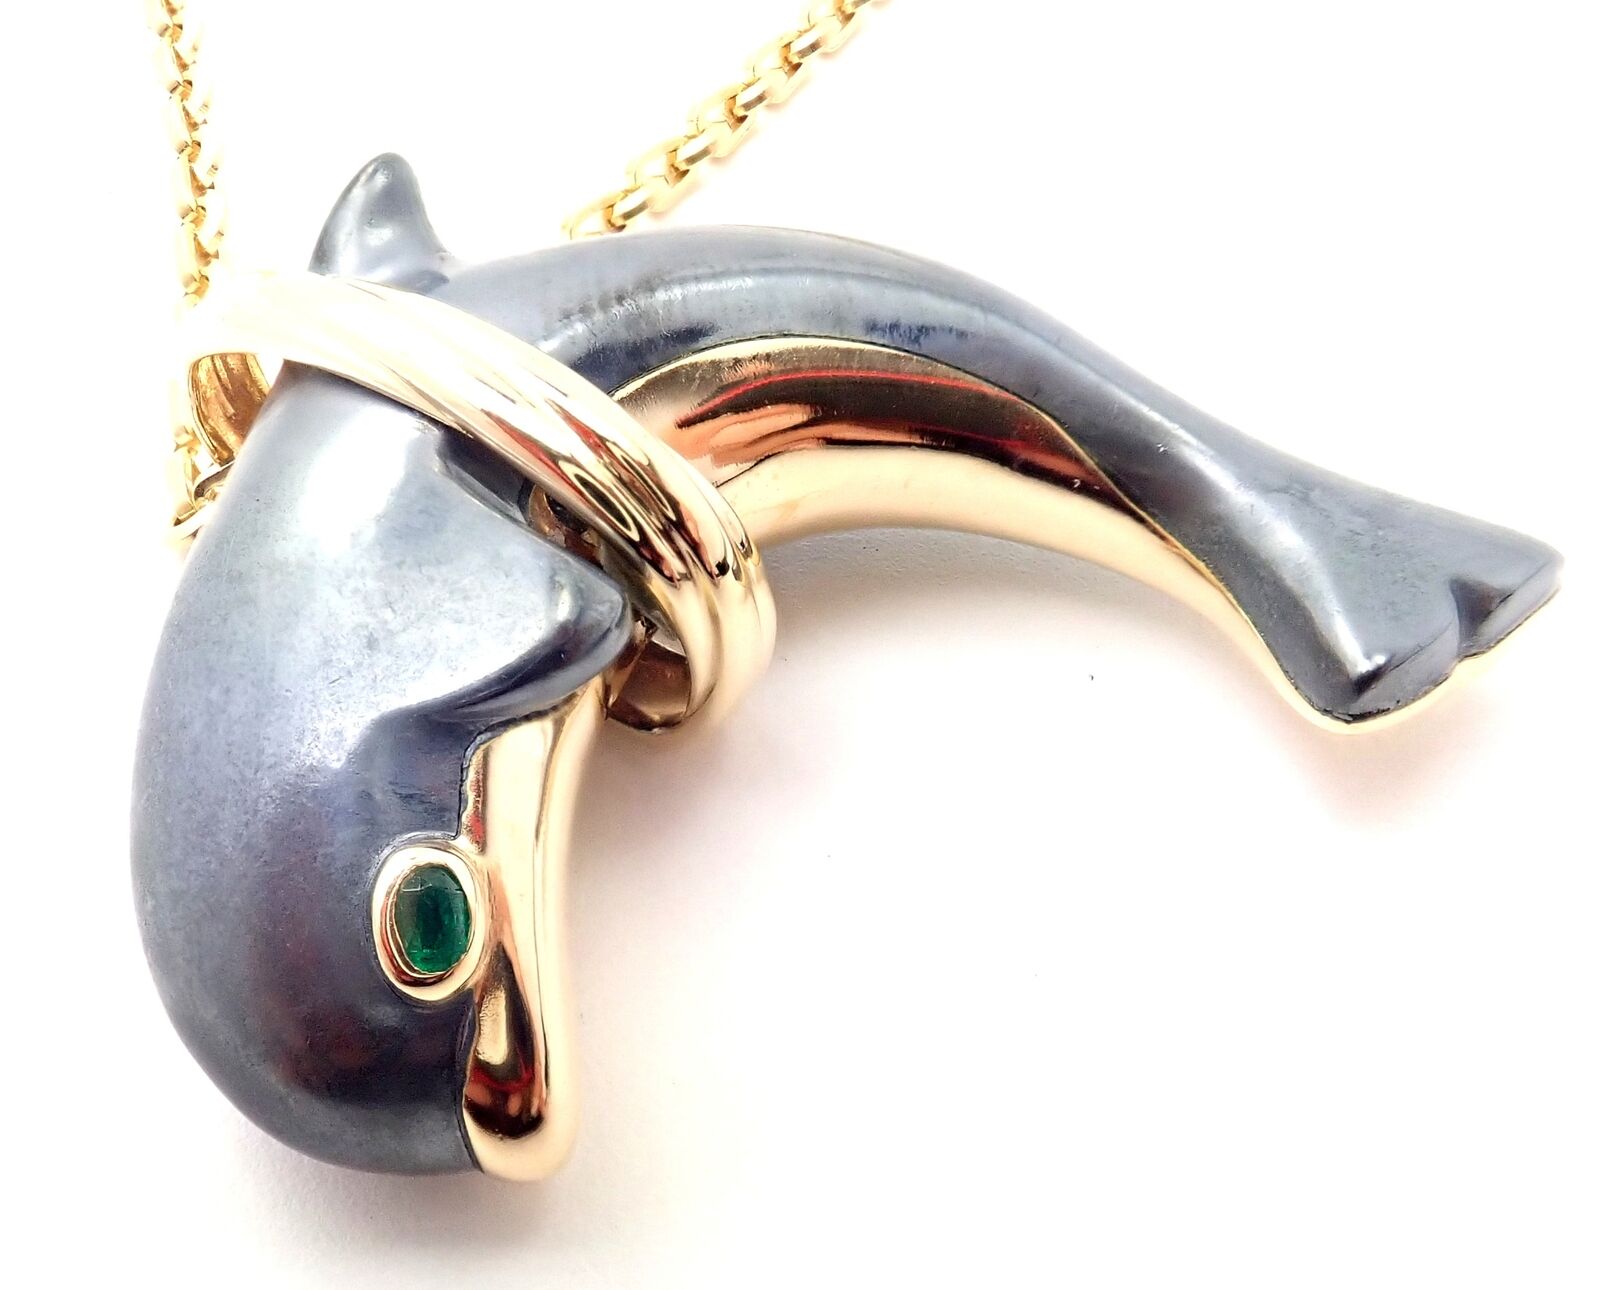 Cartier Jewelry & Watches:Fine Jewelry:Necklaces & Pendants Rare! Authentic Cartier 18k Yellow Gold Hematite Dolphin Pendant Link Necklace